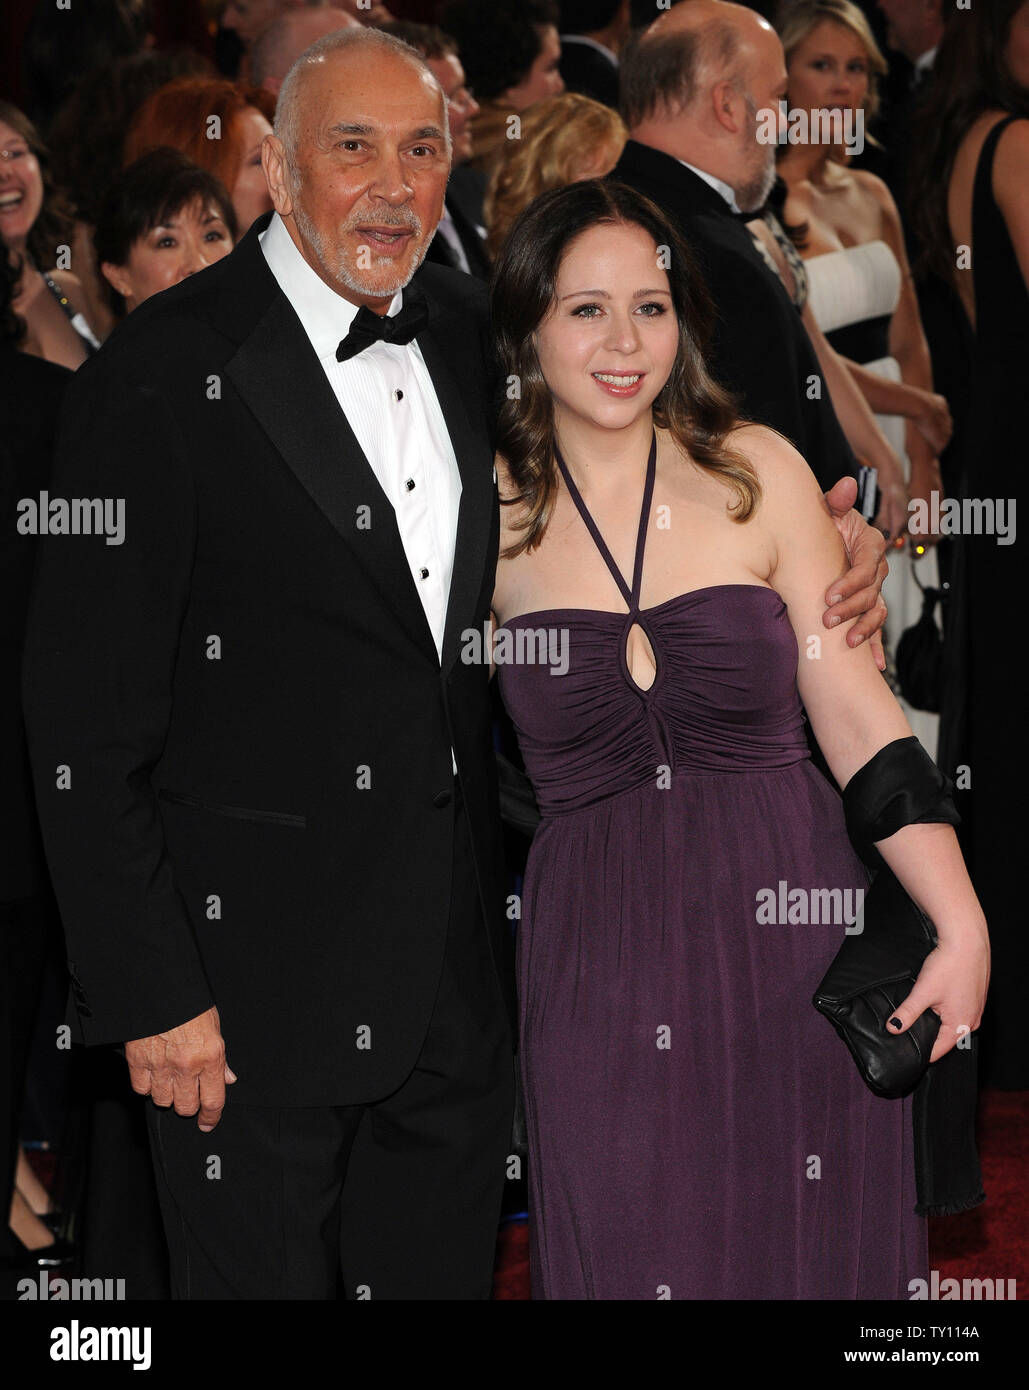 Frank Langella, best actor nominee for "Frost Nixon," and his daughter Sarah arrive at the 81st Academy Awards in Hollywood on February 22, 2009.   (UPI Photo/Jim Ruymen) Stock Photo